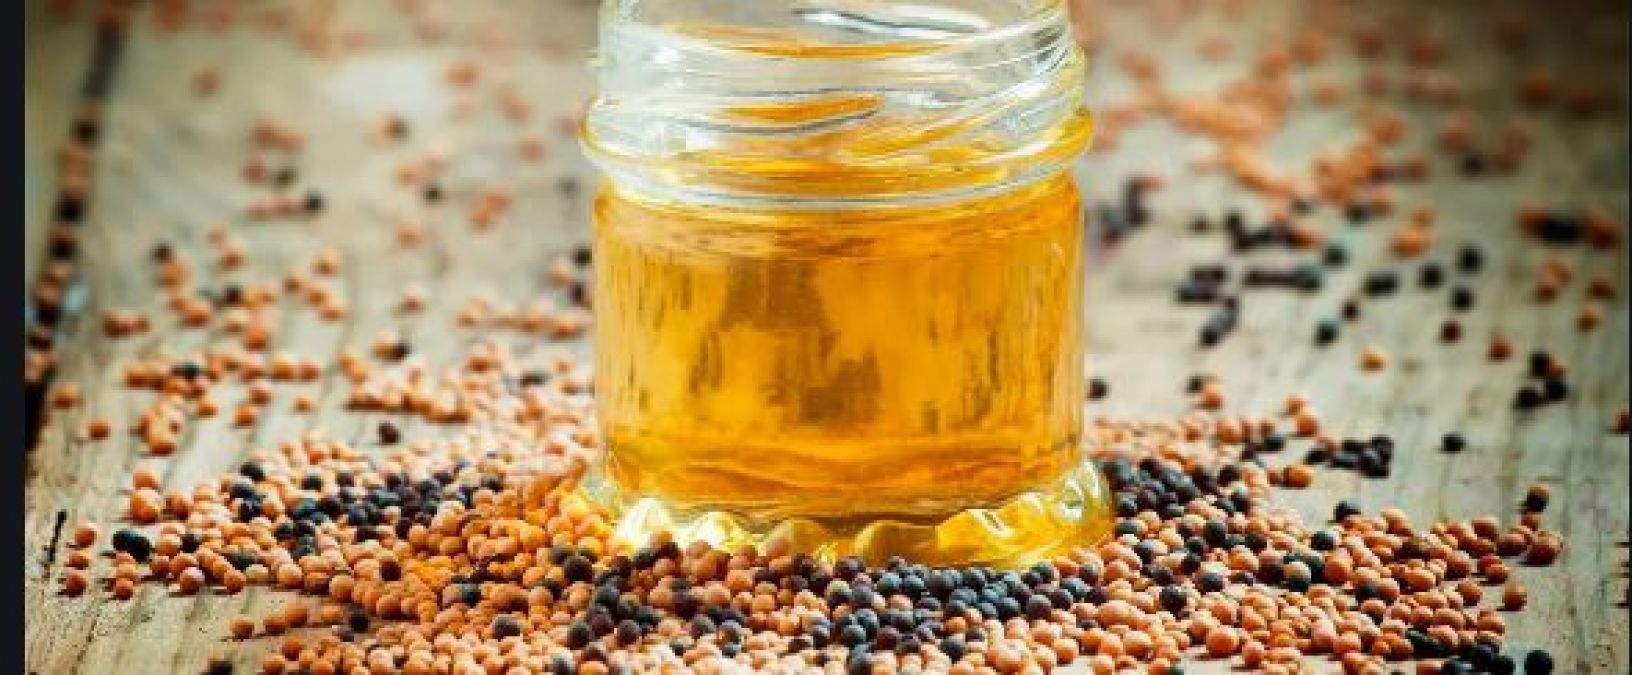 Use mustard oil for everything from health to hair